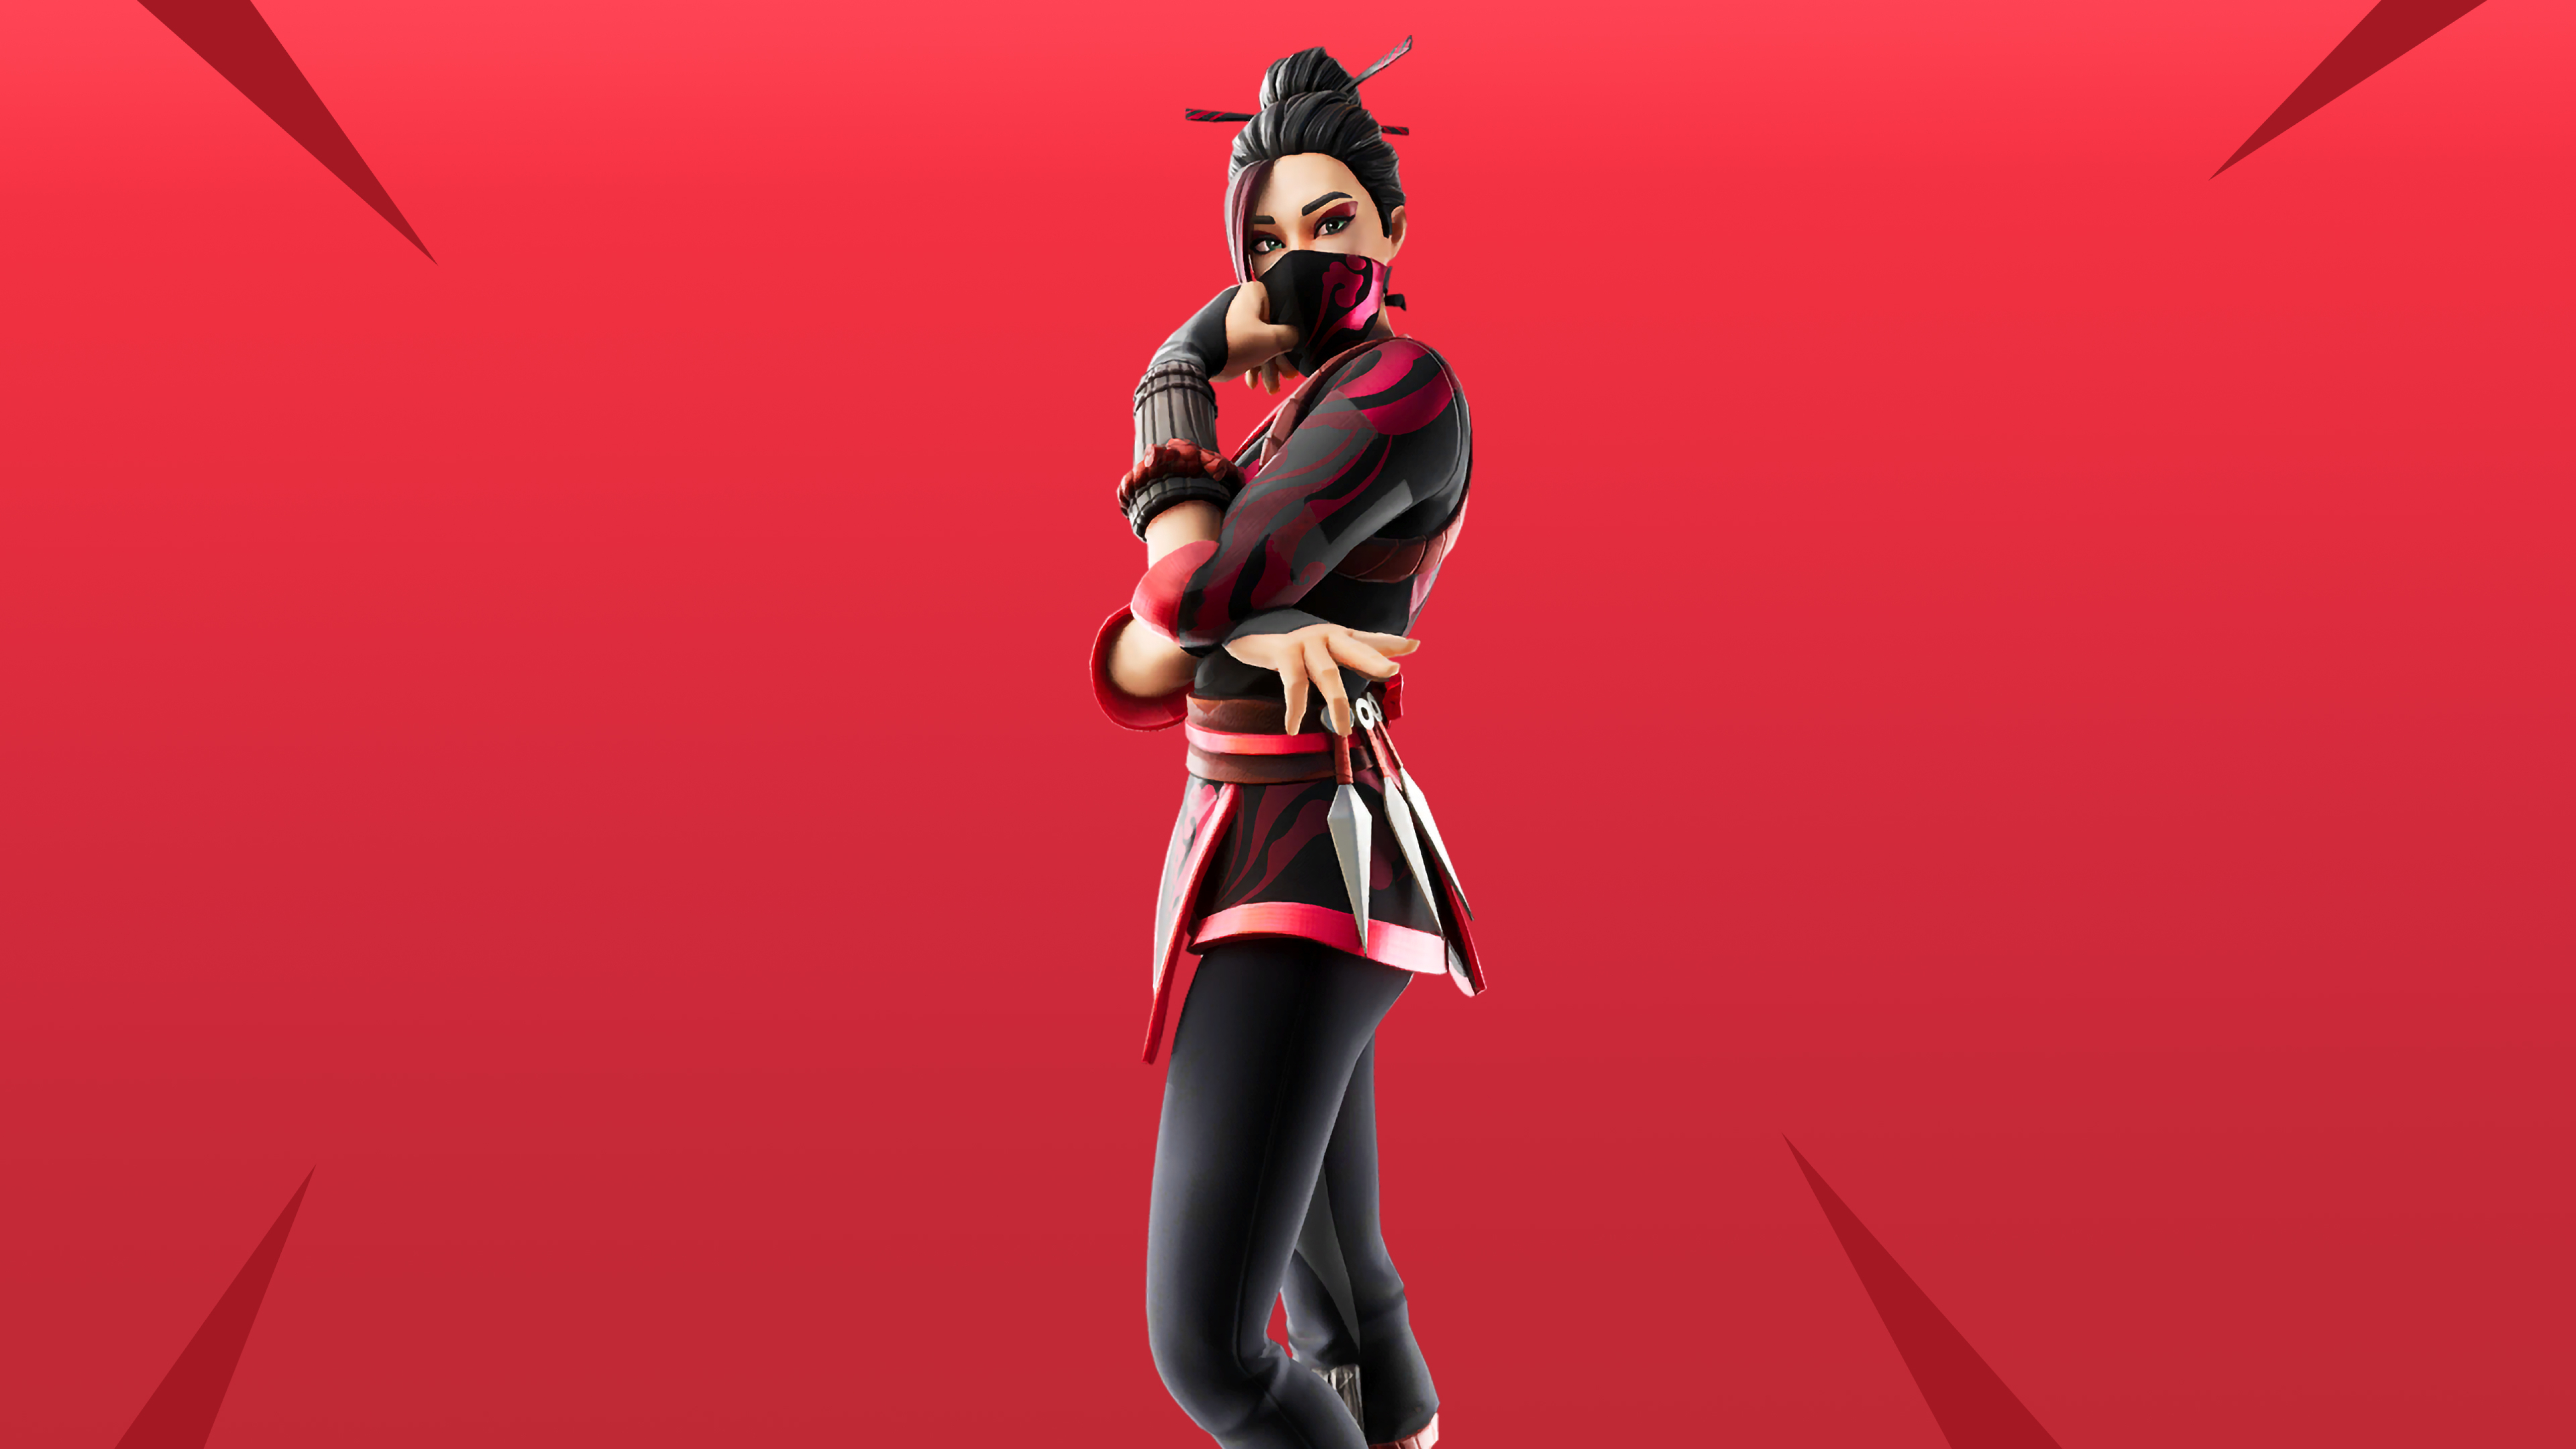 Resolution Goes Red Fortnite 5120x2880 Red Jade Fortnite 4k 5k Wallpaper Hd Games 4k Wallpapers Images Photos And Background Wallpapers Den